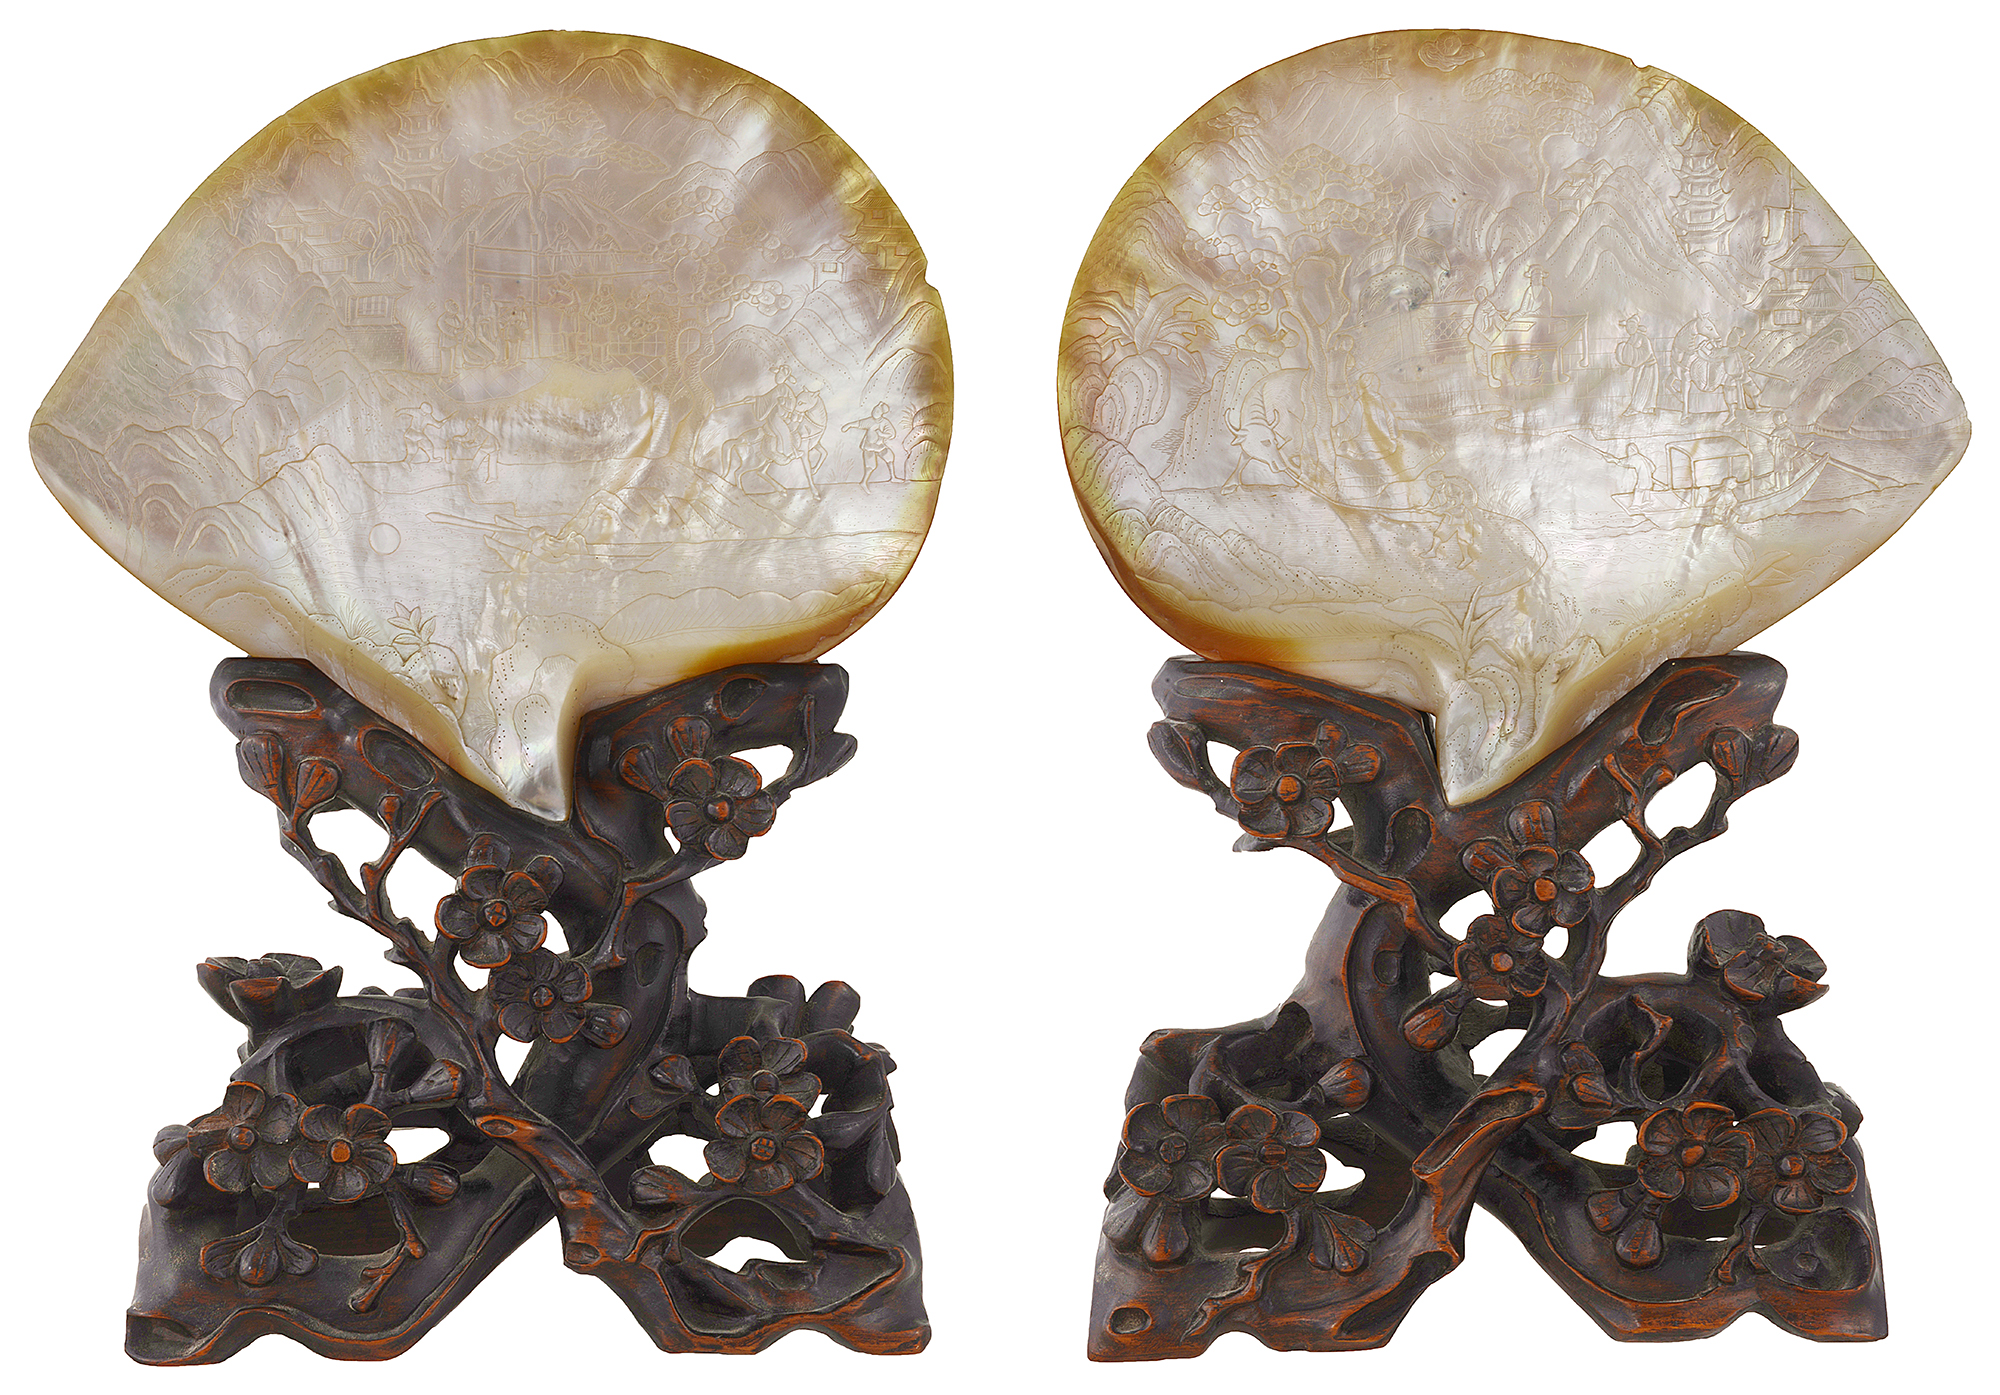 A late 19th century pair of Chinese Canton carved mother of pearl shells on hard wood stands